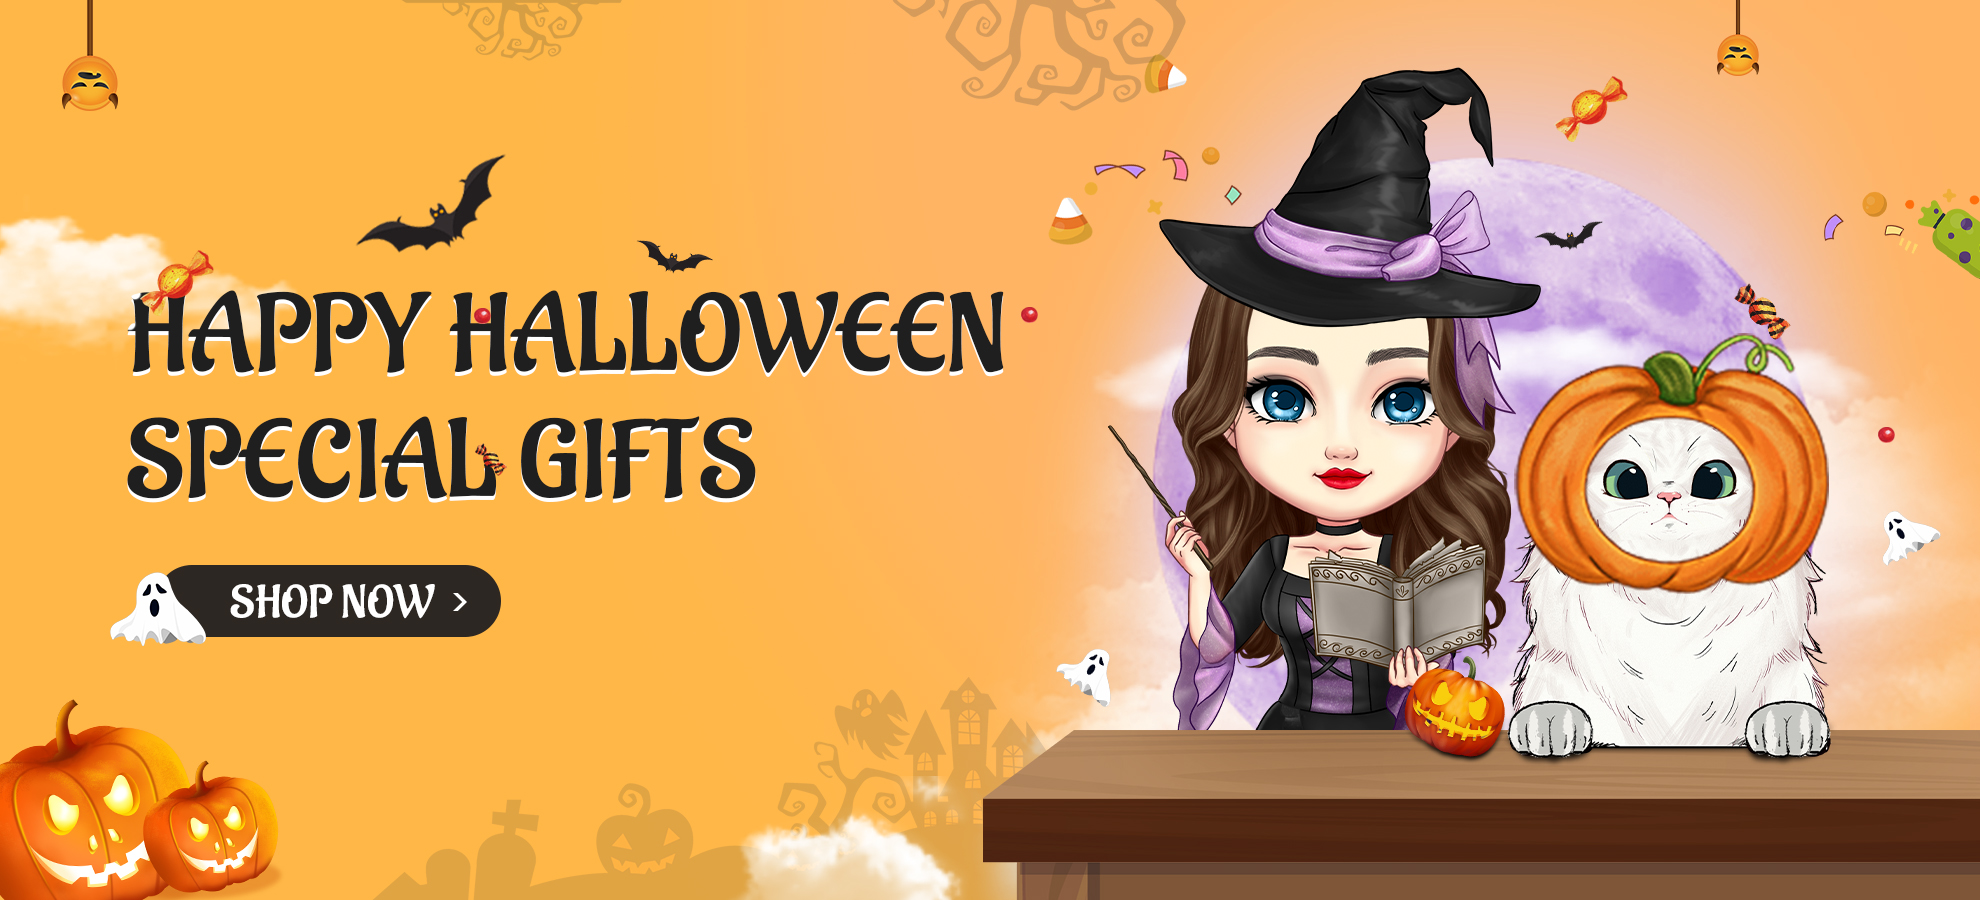 Halloween special gifts